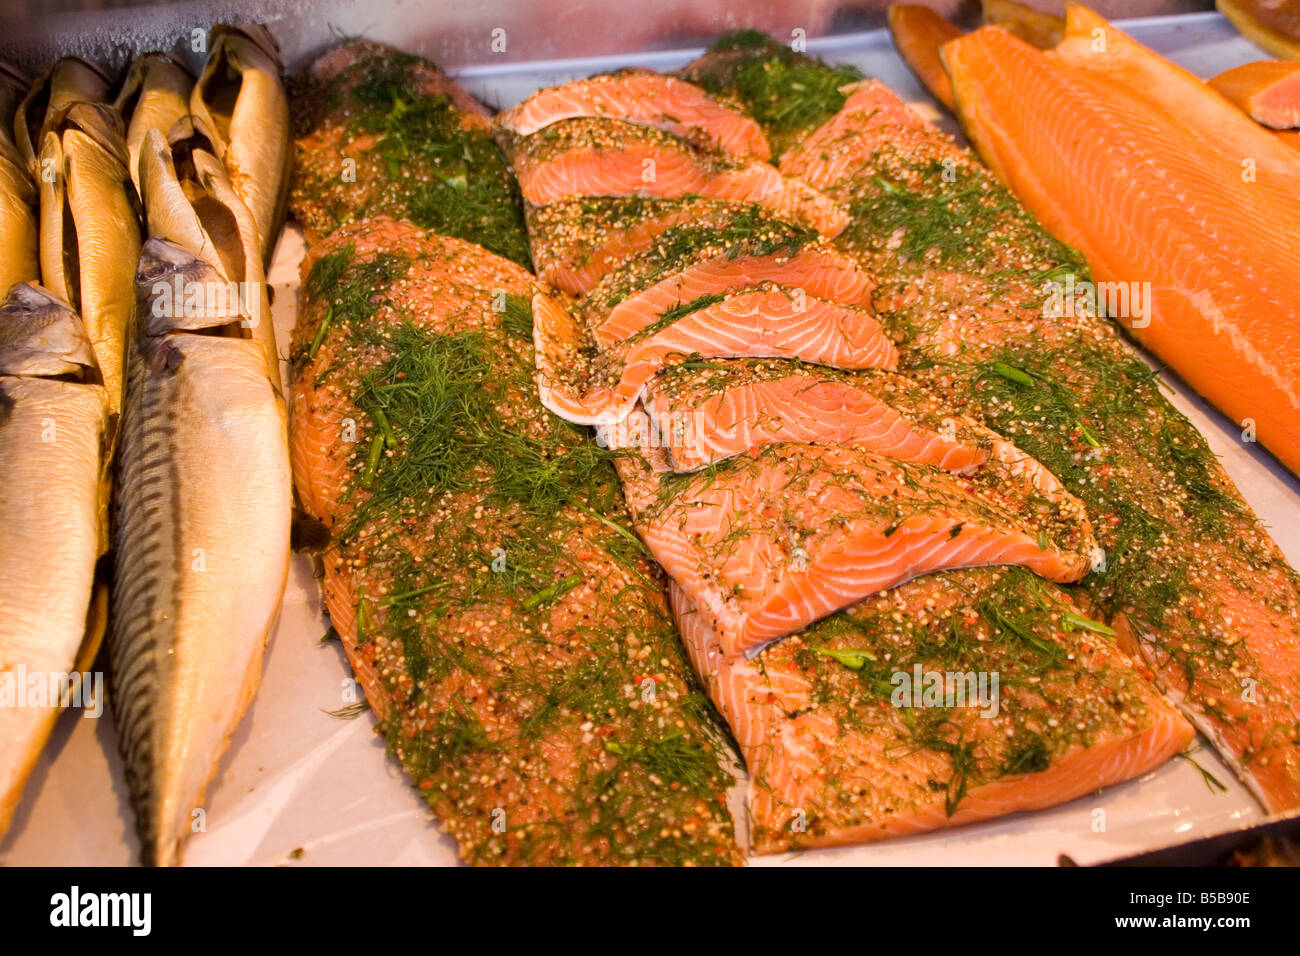 Smoked salmon with dill and herbs, and other smoked fish for sale at the Bergen Fish Market in Bergen Norway Stock Photo